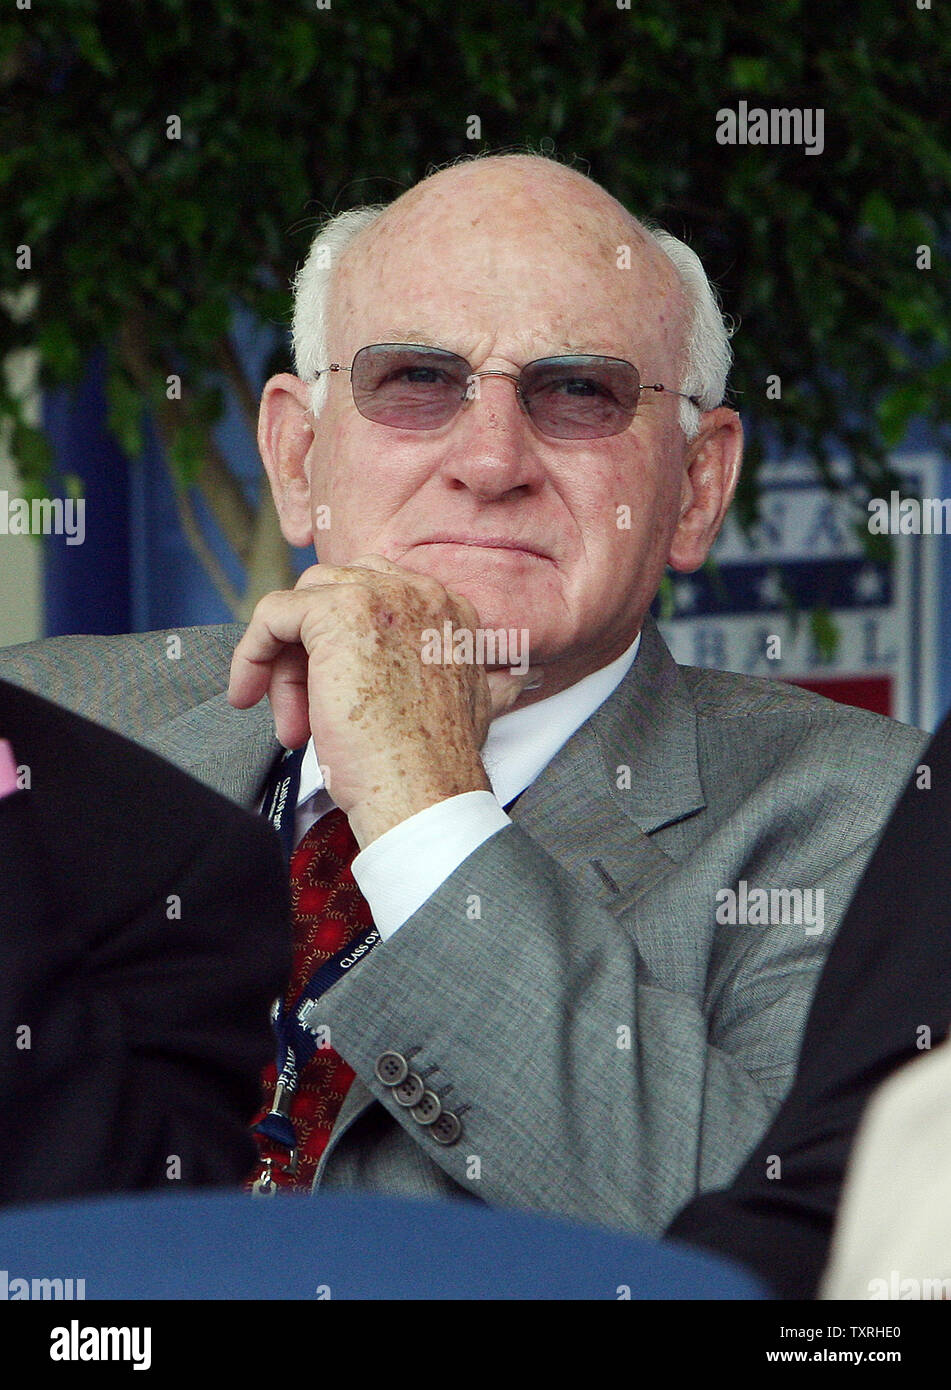 National Baseball Hall of Fame member Harmon Killebrew listens during induction ceremonies for new members Rickey Henderson and Jim Rice in Cooperstown, New York on July 26, 2009.  (UPI Photo/Bill Greenblatt) Stock Photo